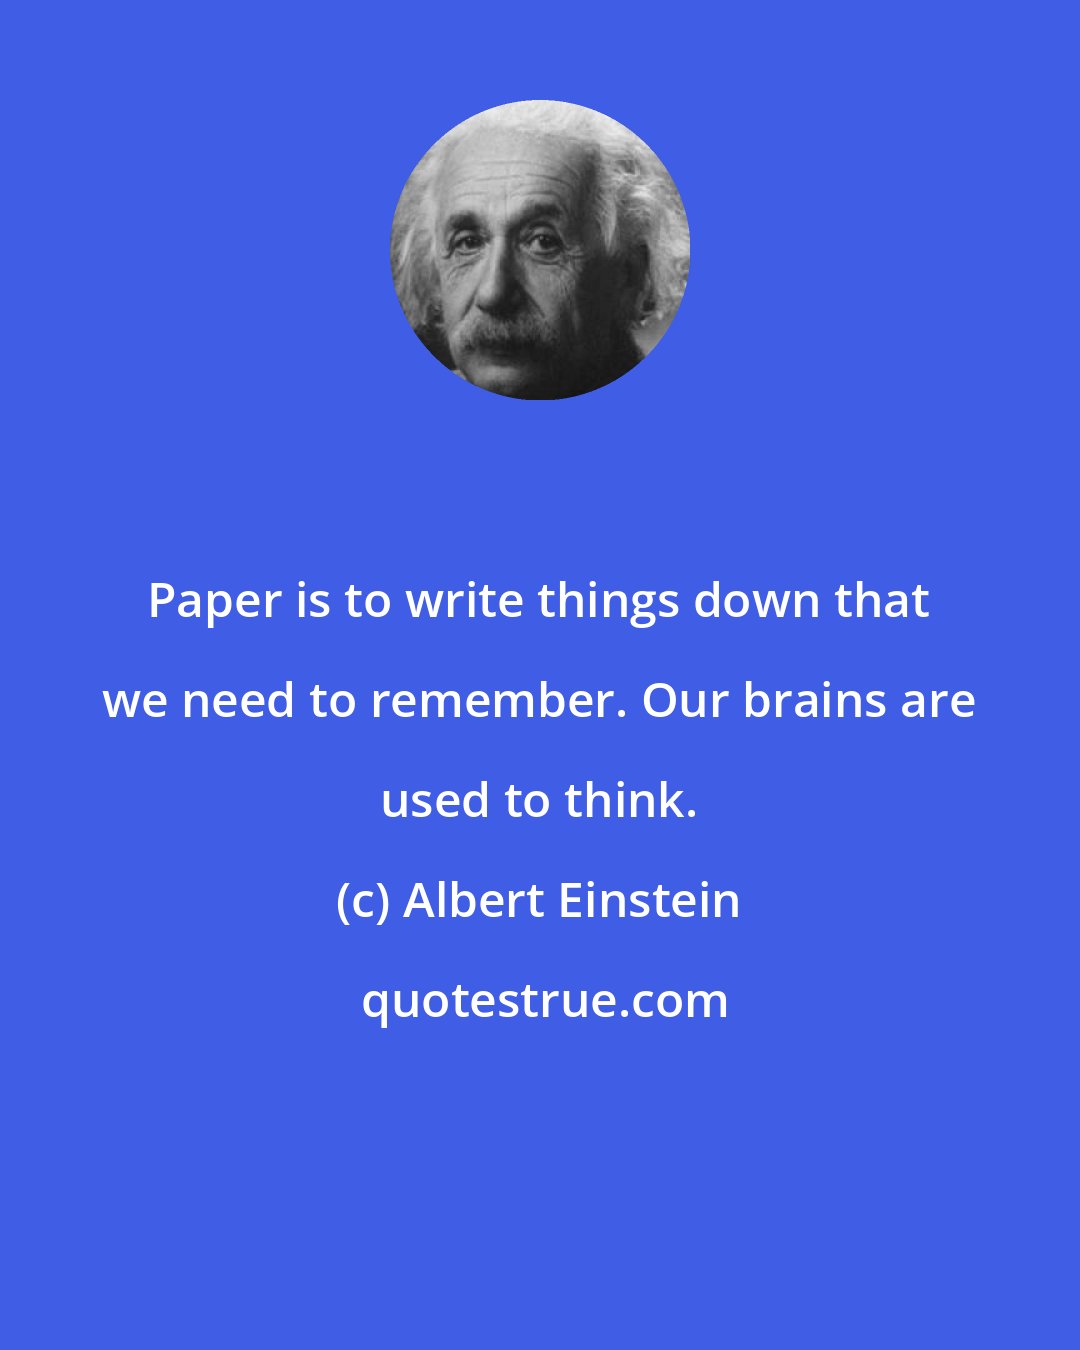 Albert Einstein: Paper is to write things down that we need to remember. Our brains are used to think.